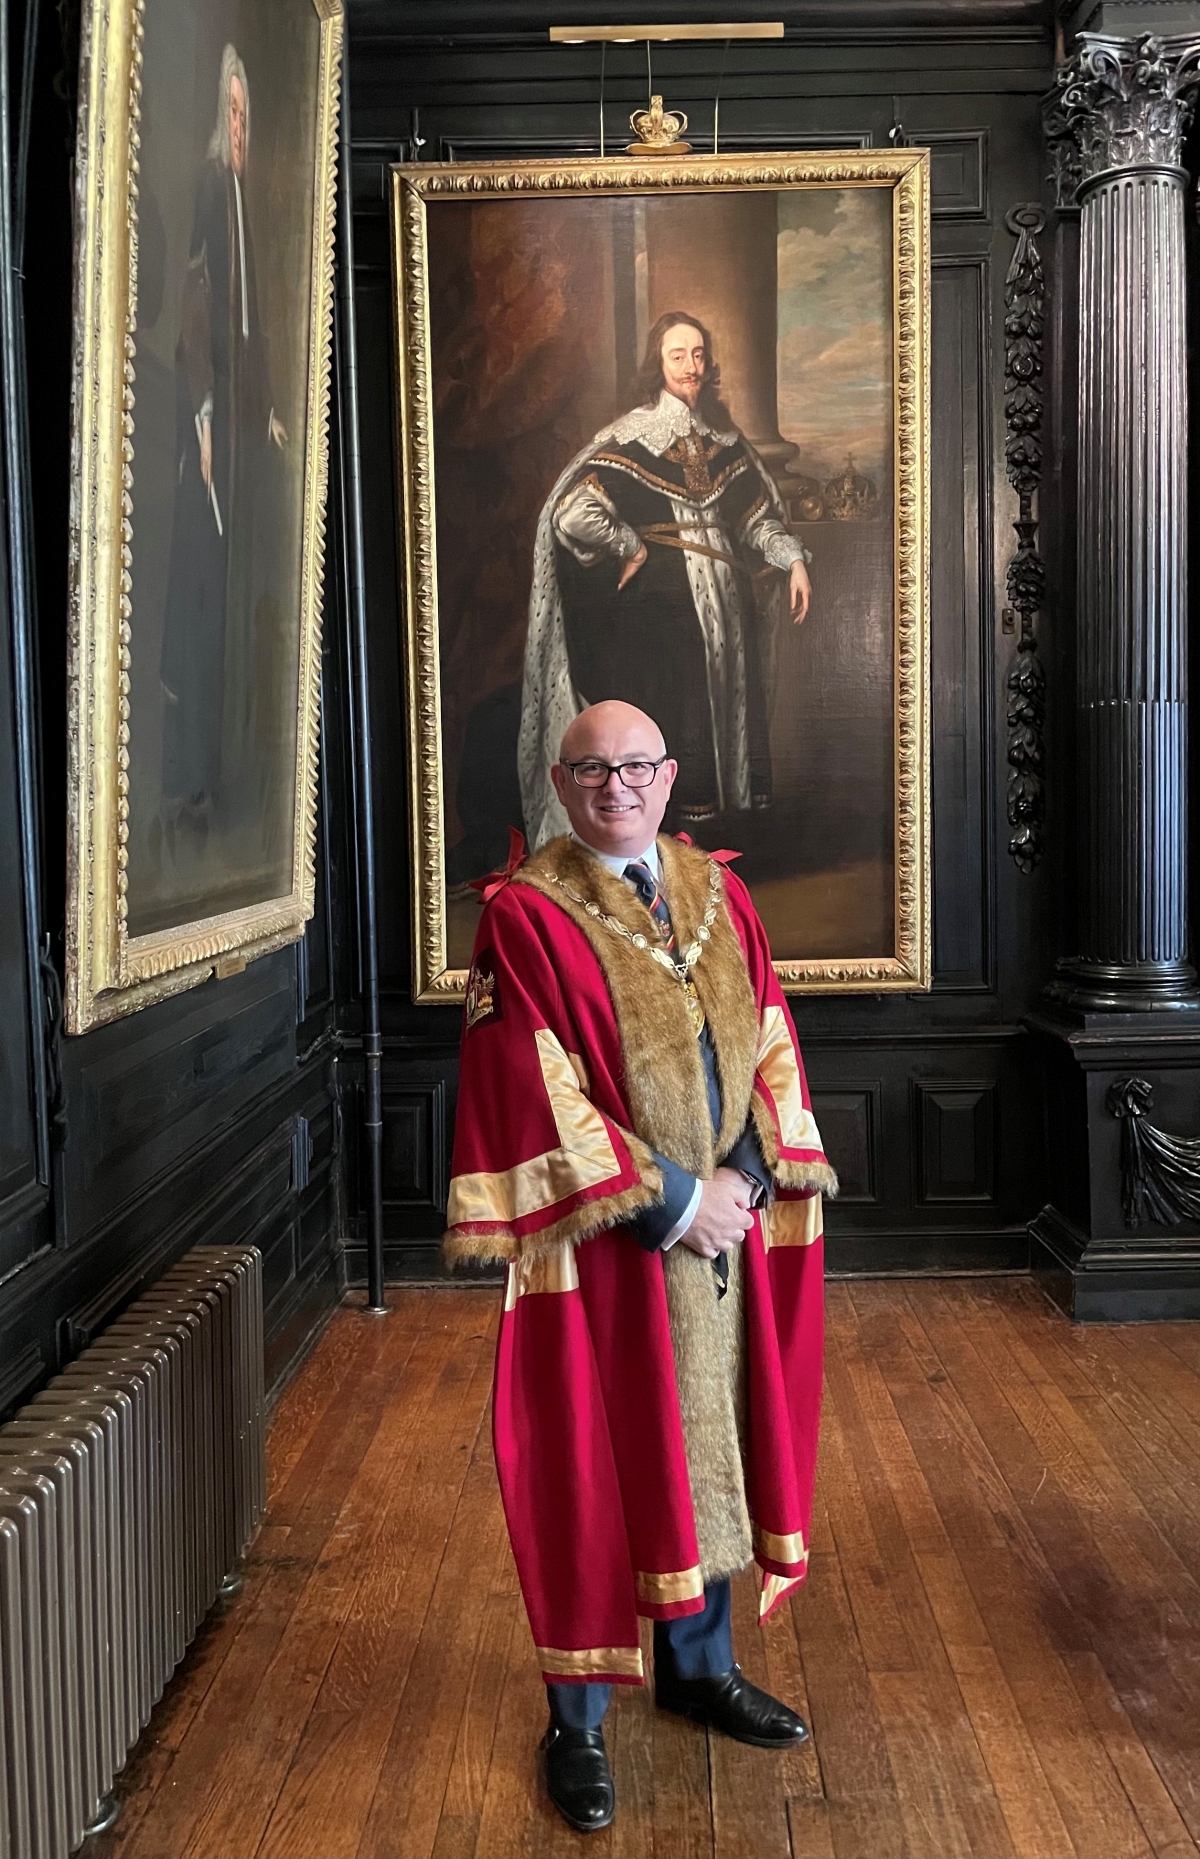 The Lord Mayor's Service of Reflection of Hope 